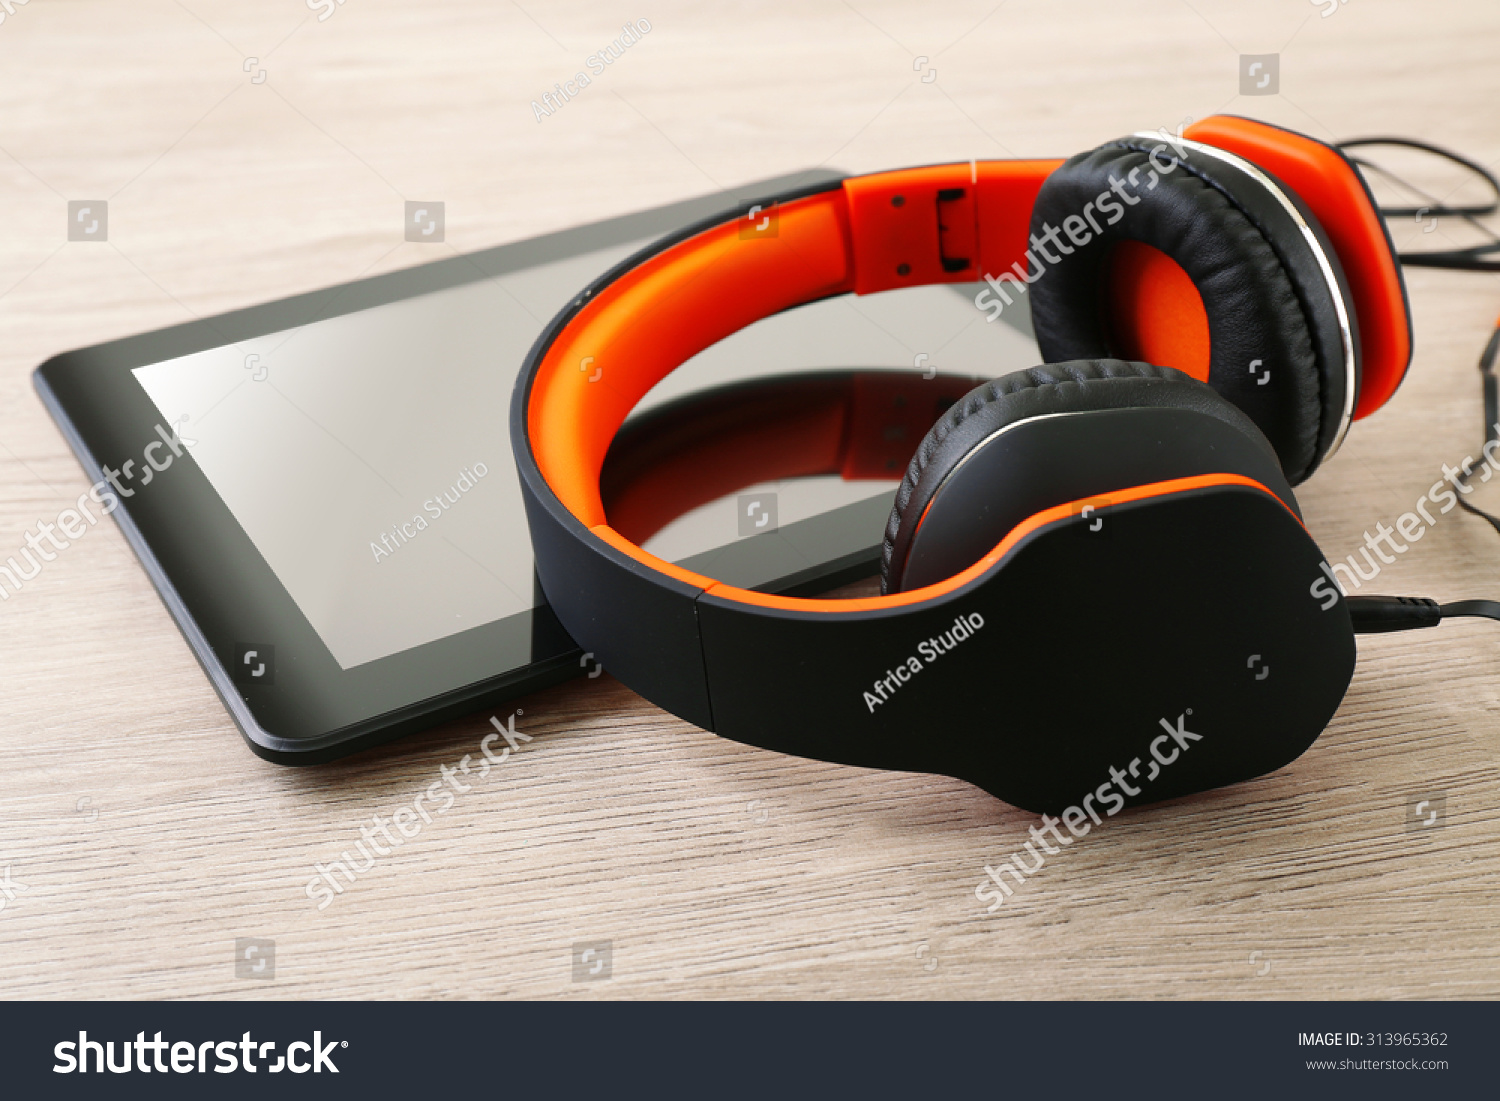 Headphones with tablet on wooden table close up #313965362